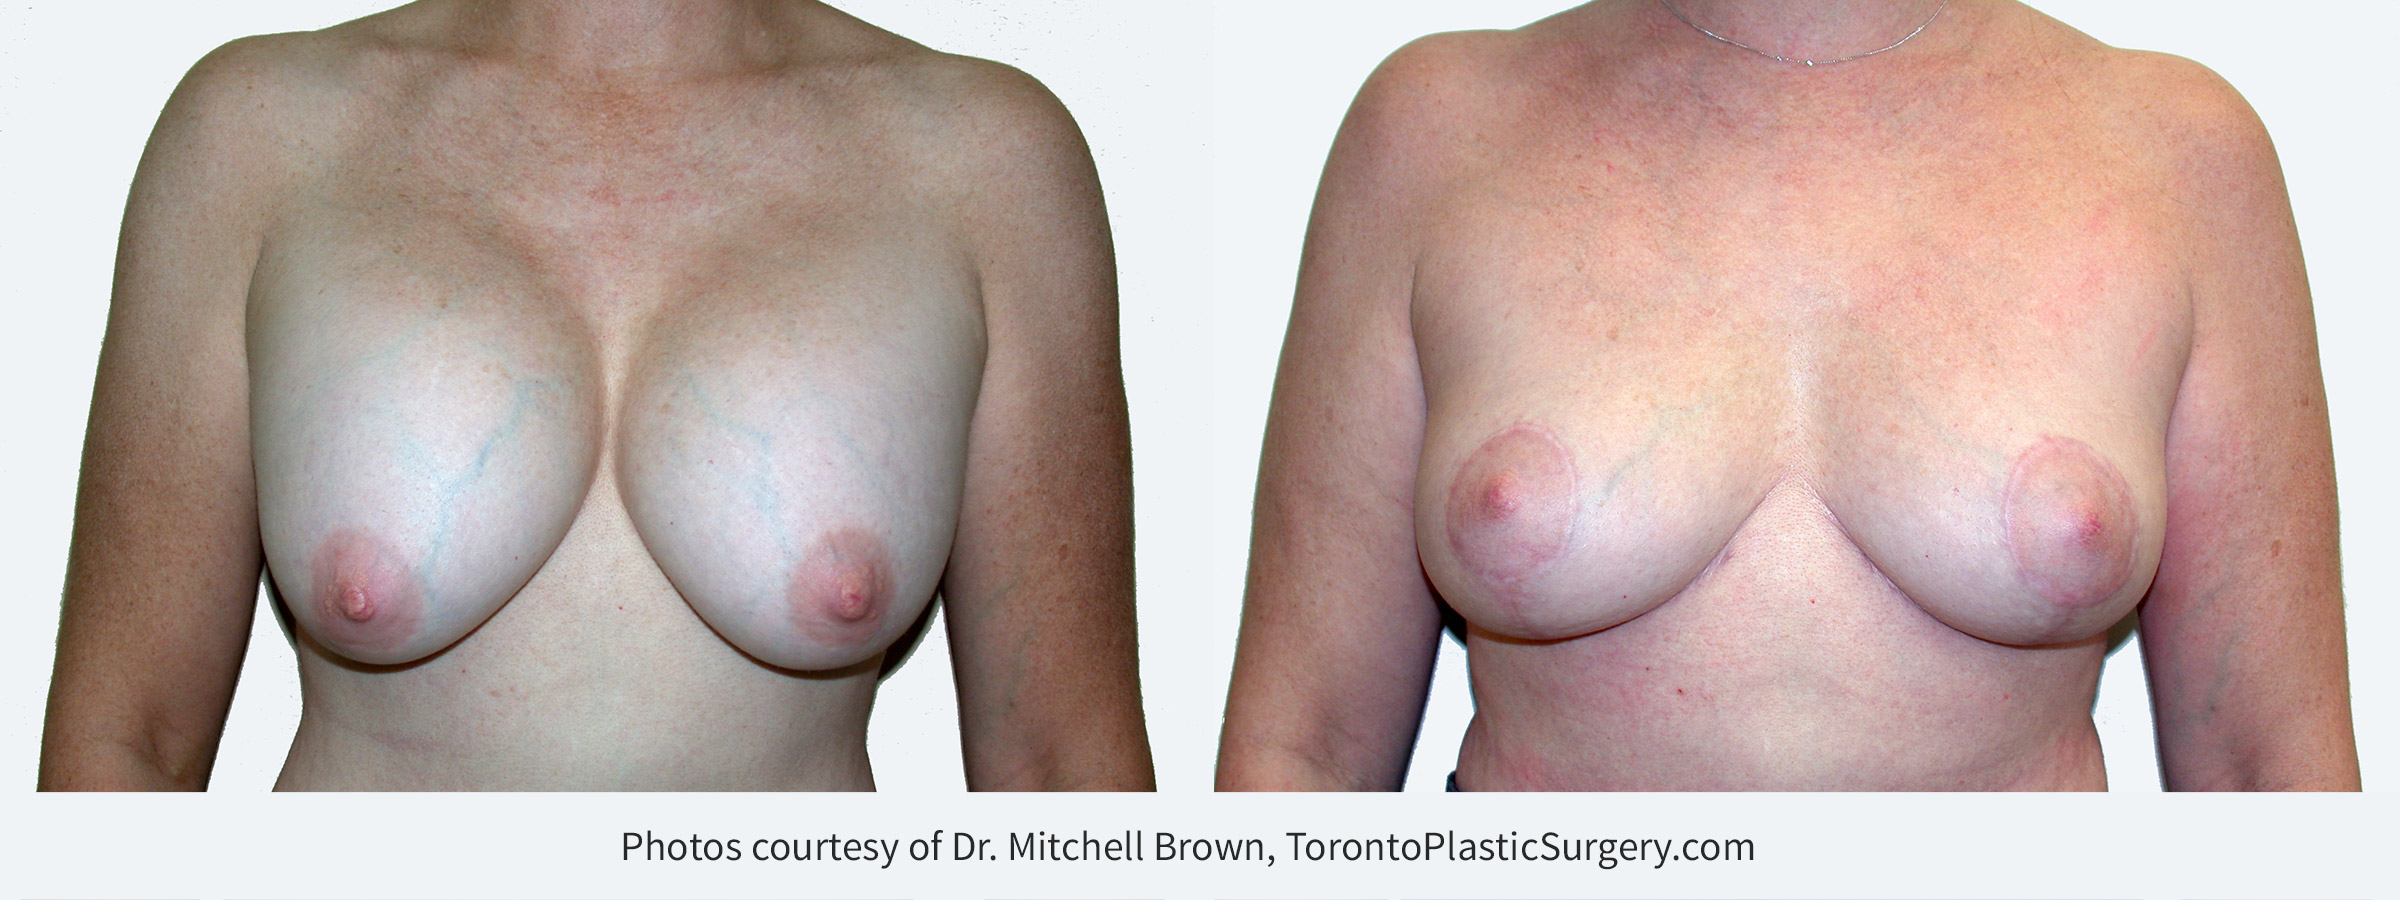 Recurrent capsular contracture and sagging of the breast treated with implant removal and reshaping of the breasts with a breast lift and fat grafting. Before and 6 months after.